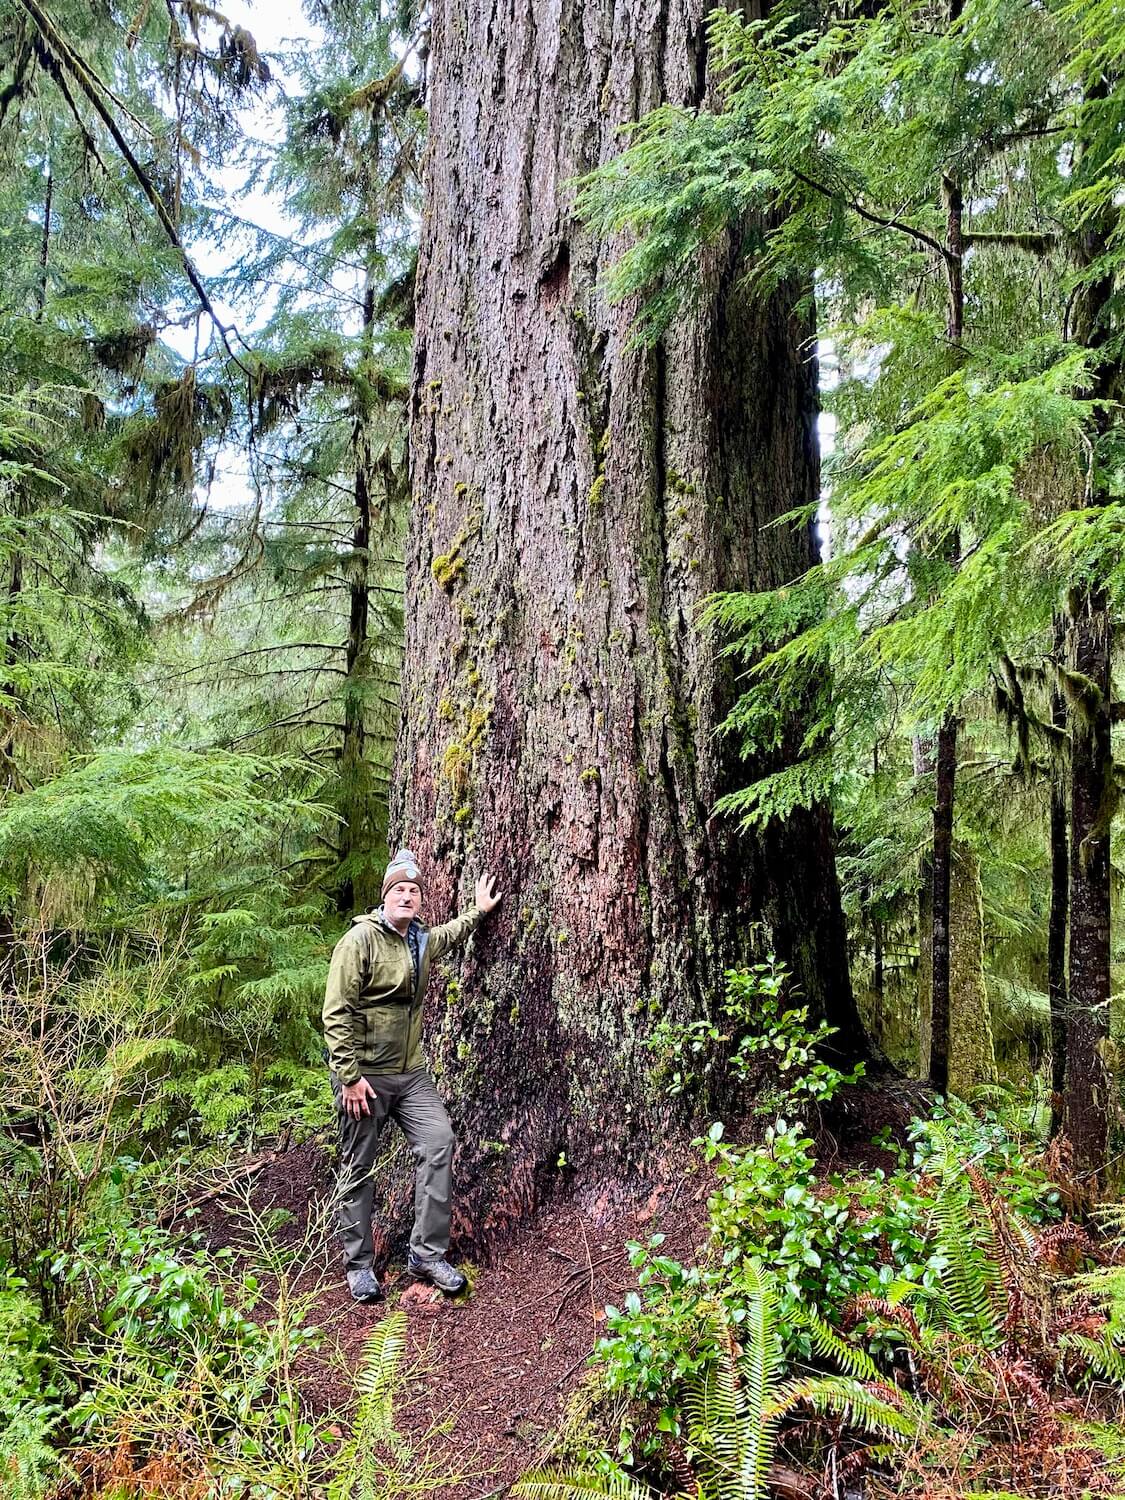 Matthew Kessi stands against a ancient Douglas fir tree in a dense rainforest on the Olympic Peninsula.  The ferns look wet and green amongst lower branches of smaller fir trees.